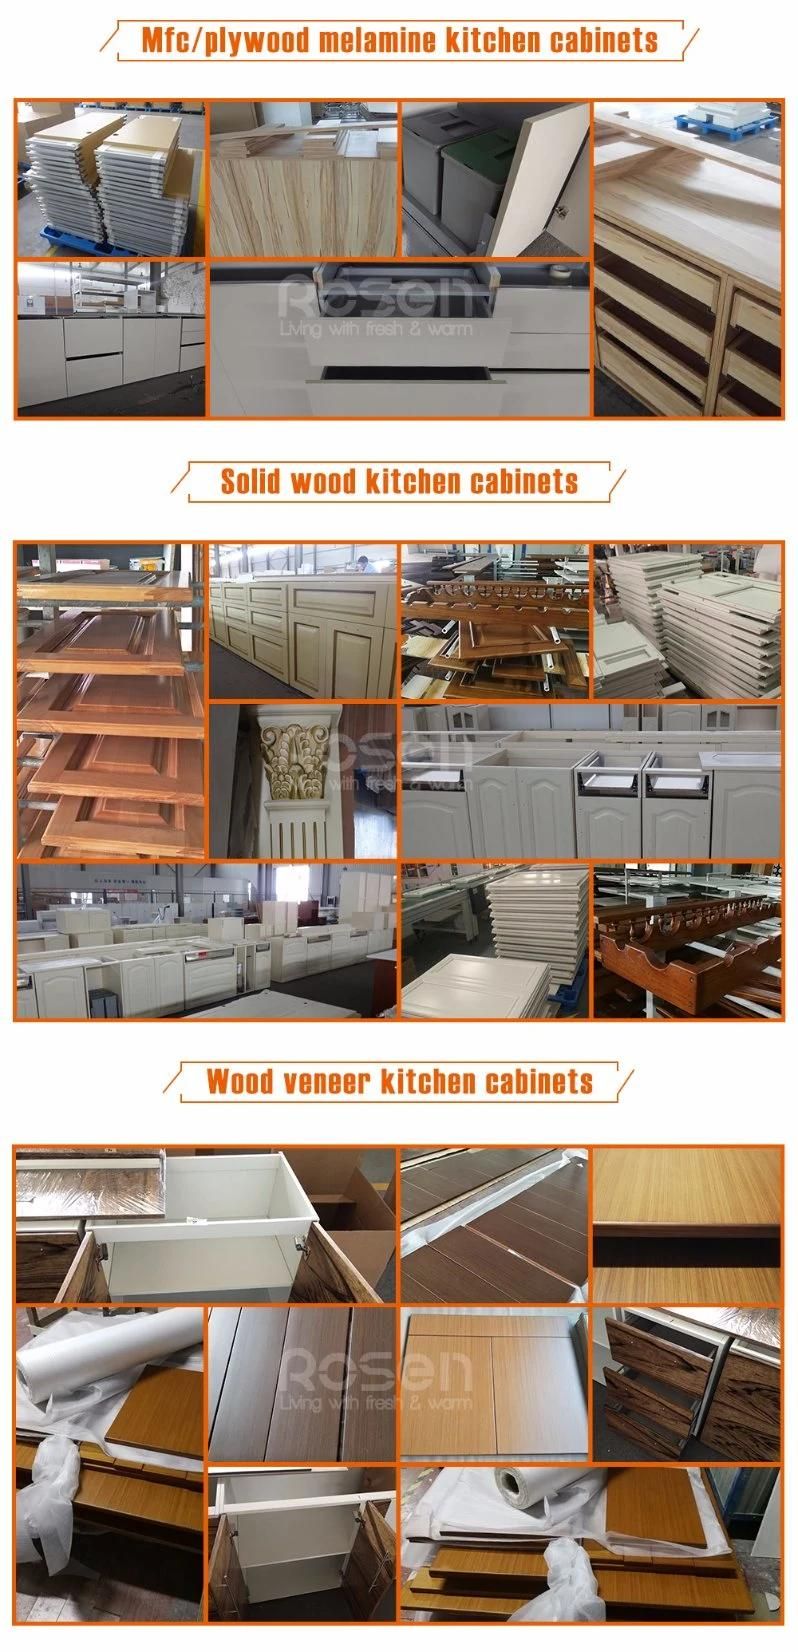 Wholesale High Quality White and Gray Lacquer Kitchen Cabinet